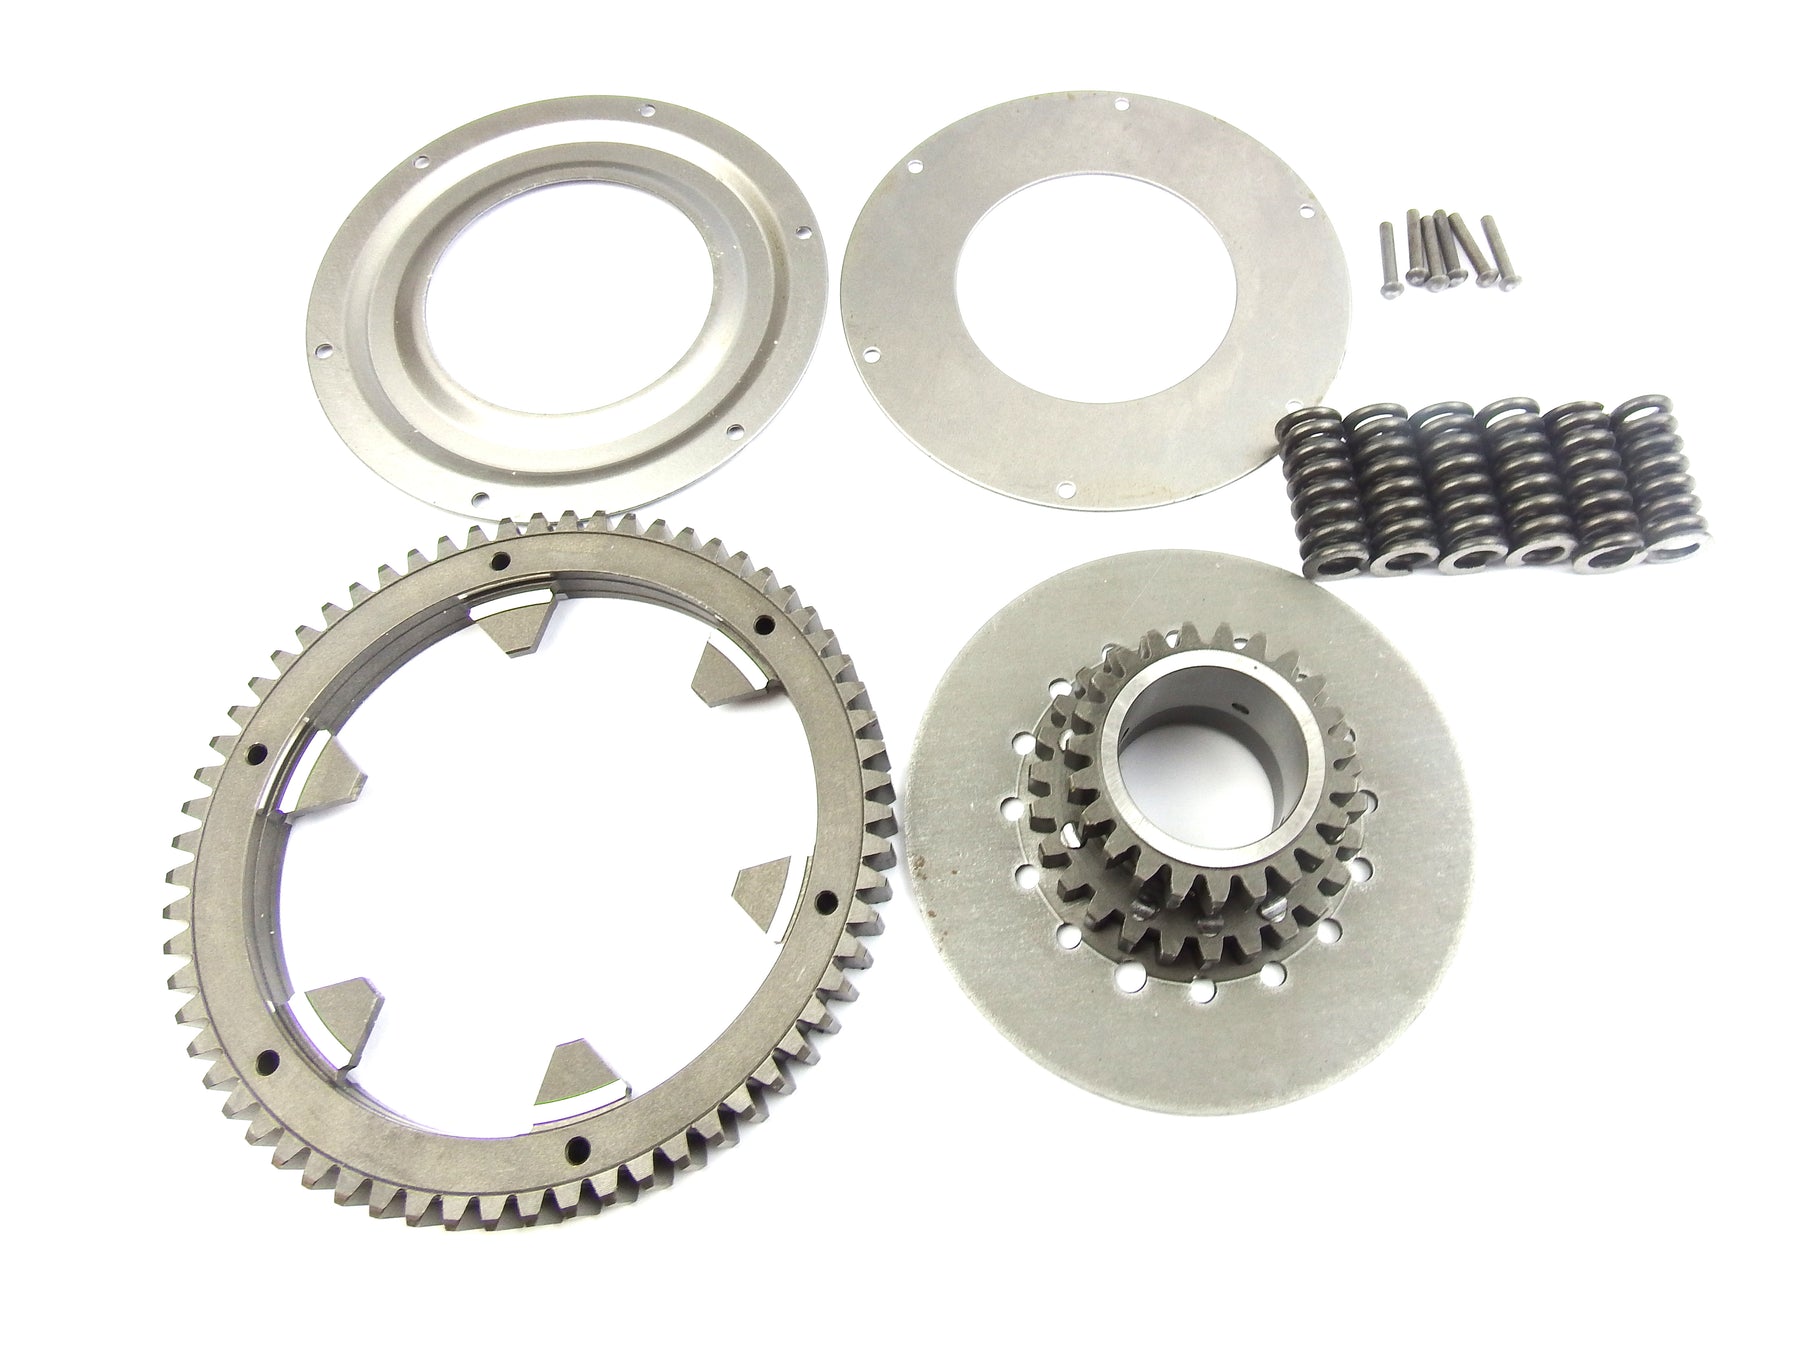 Vespa Gearbox Upgear Kit for PX125, Super 23/64